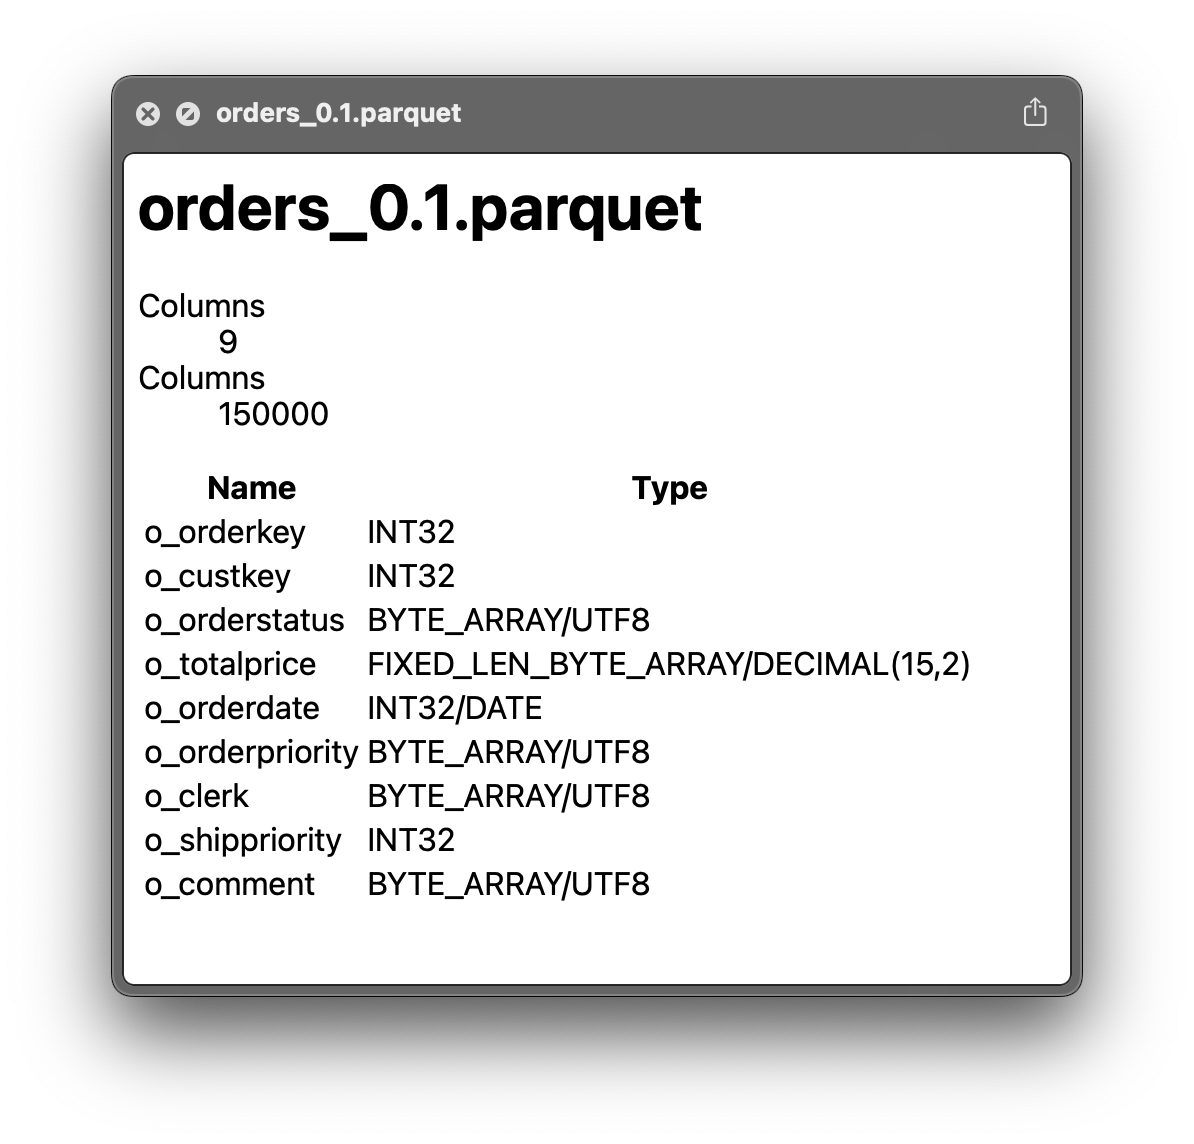 Screenshot of a QuickLook preview dialog showing a summary of a file named orders_0.1.parquet